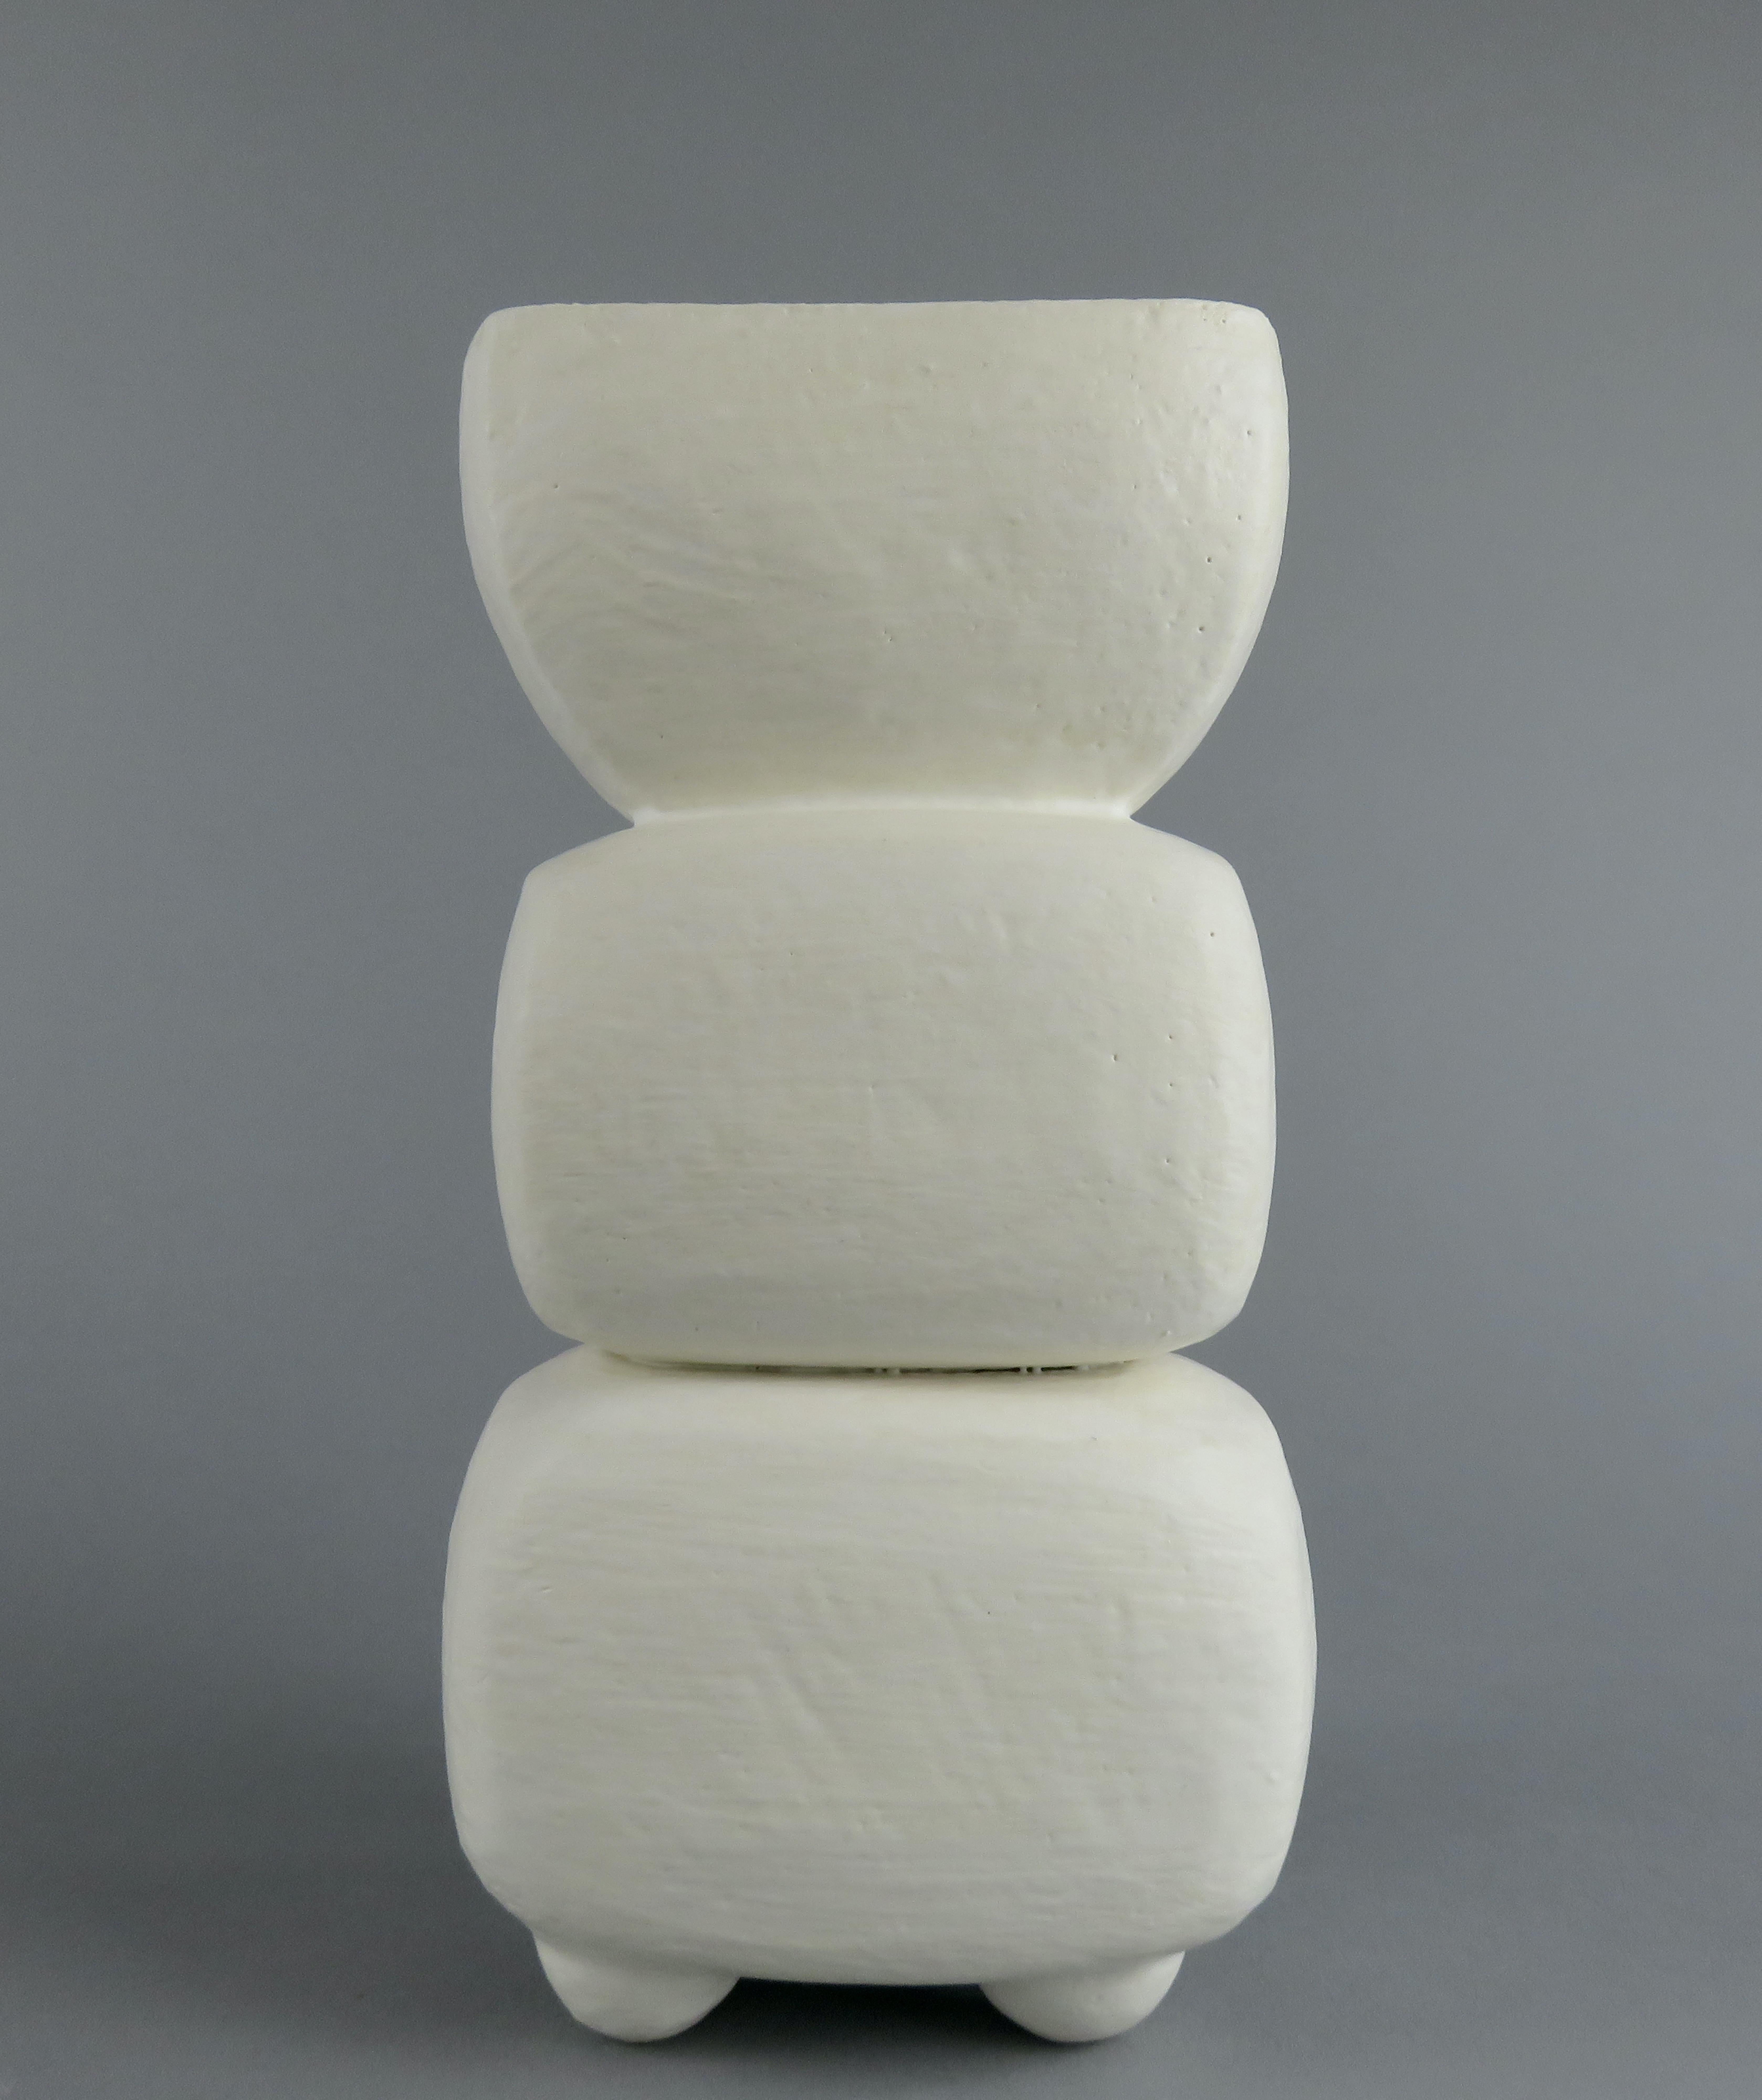 Creamy White 3-Part Totem, Rectangular Cup on Top, Hand Built Ceramic Sculpture For Sale 2